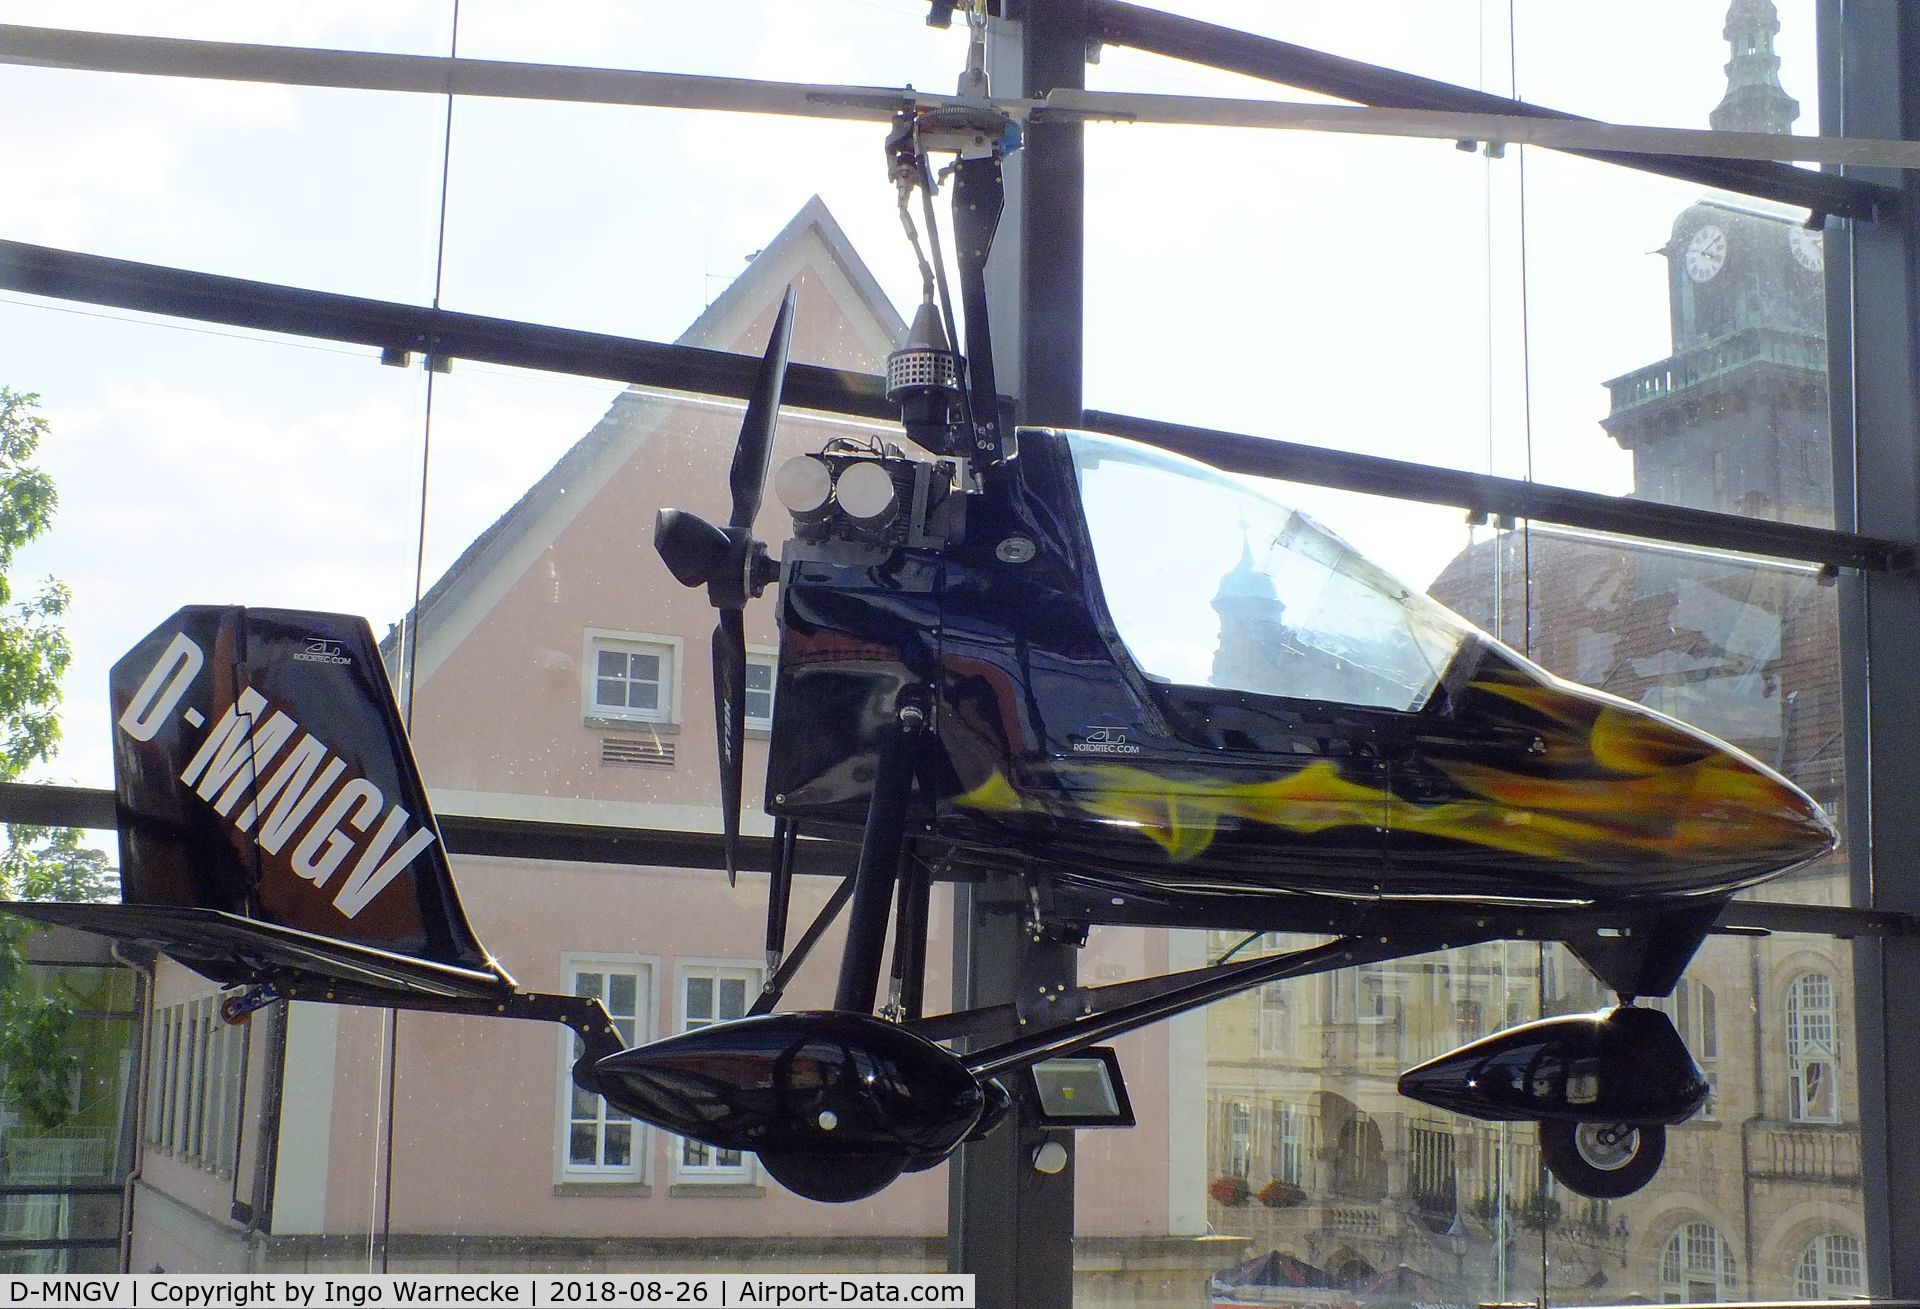 D-MNGV, Rotortec Cloud Dancer C/N unknown_d-mngv, Rotortec Cloud Dancer at the Hubschraubermuseum (helicopter museum), Bückeburg